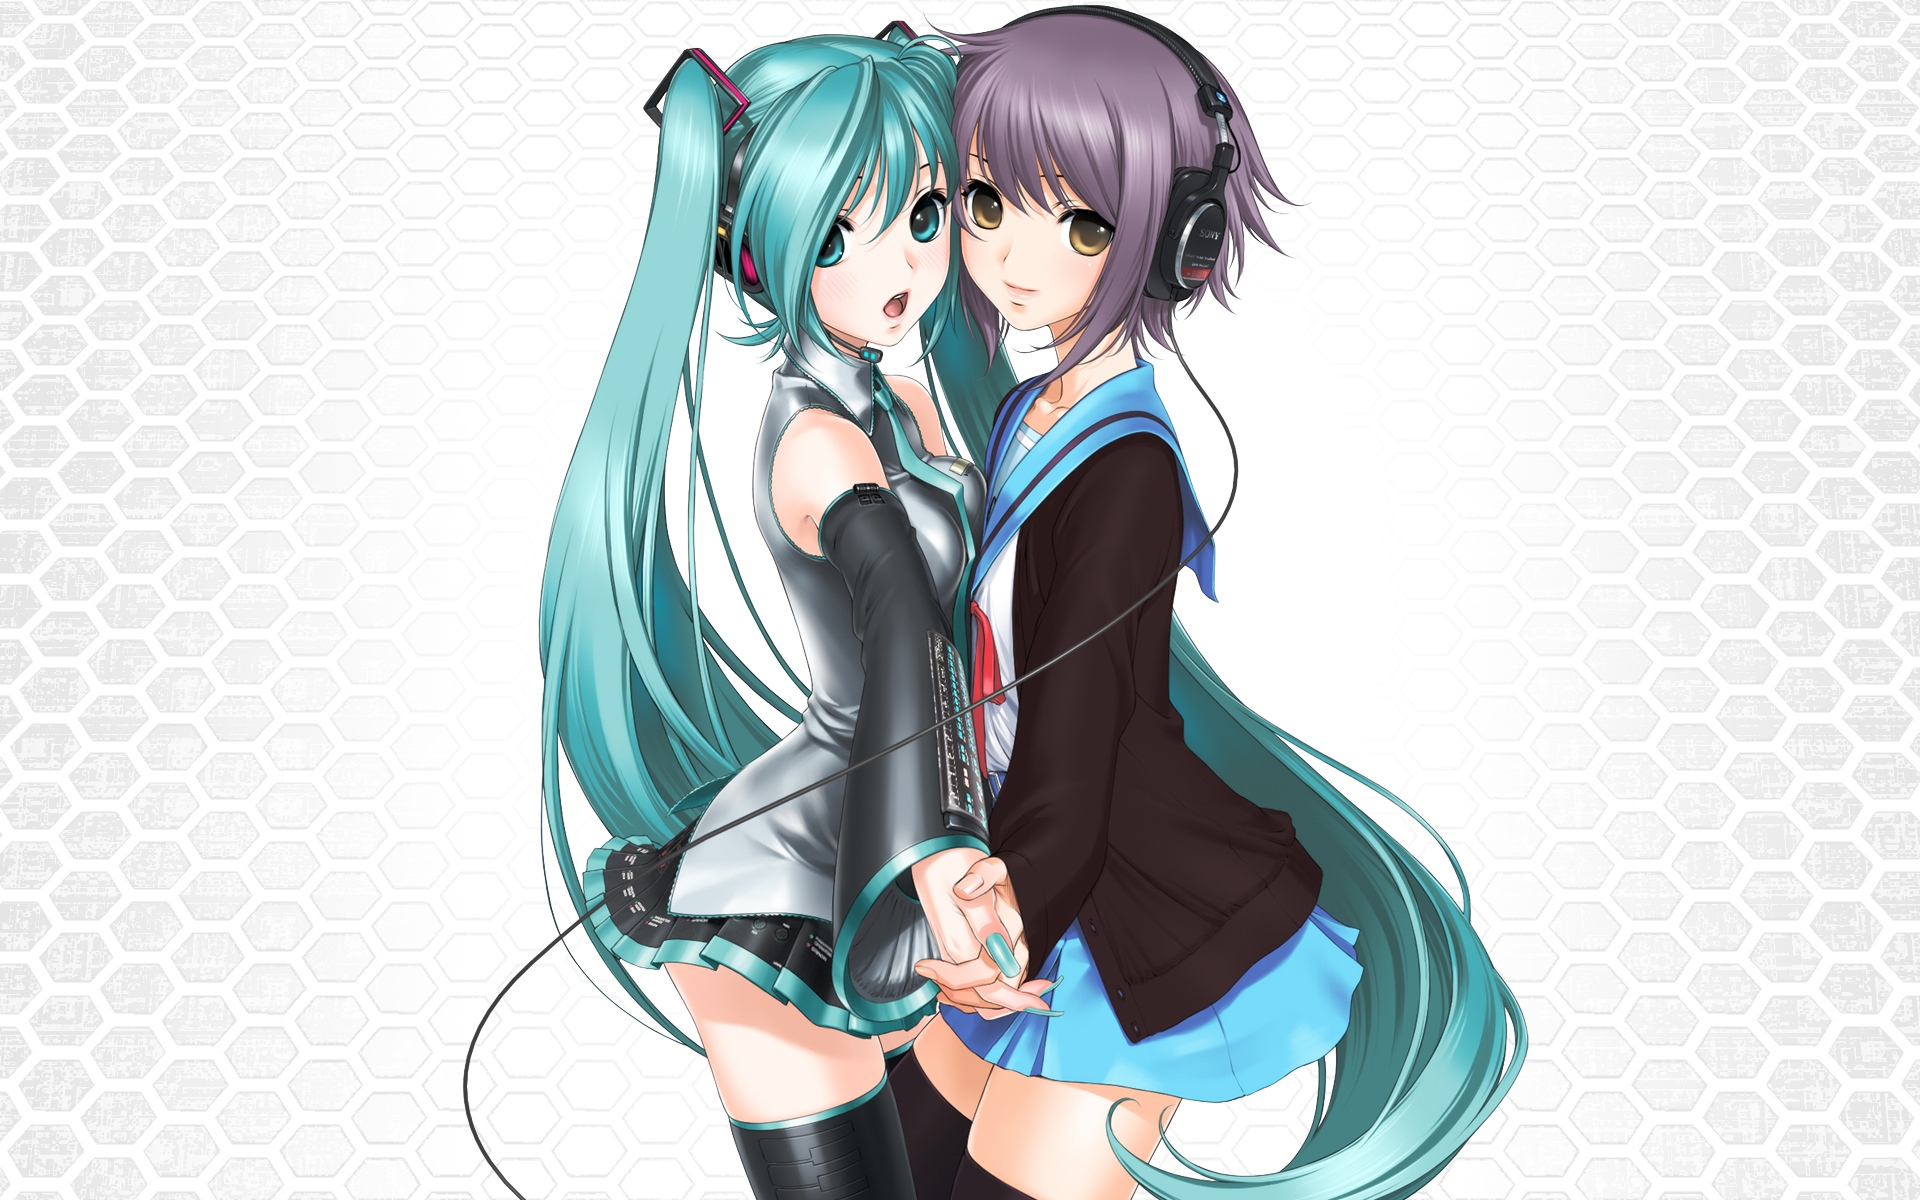 Hatsune Miku and Yuki Nagato in a vibrant anime crossover with headphones, depicting a Vocaloid and The Melancholy of Haruhi Suzumiya.